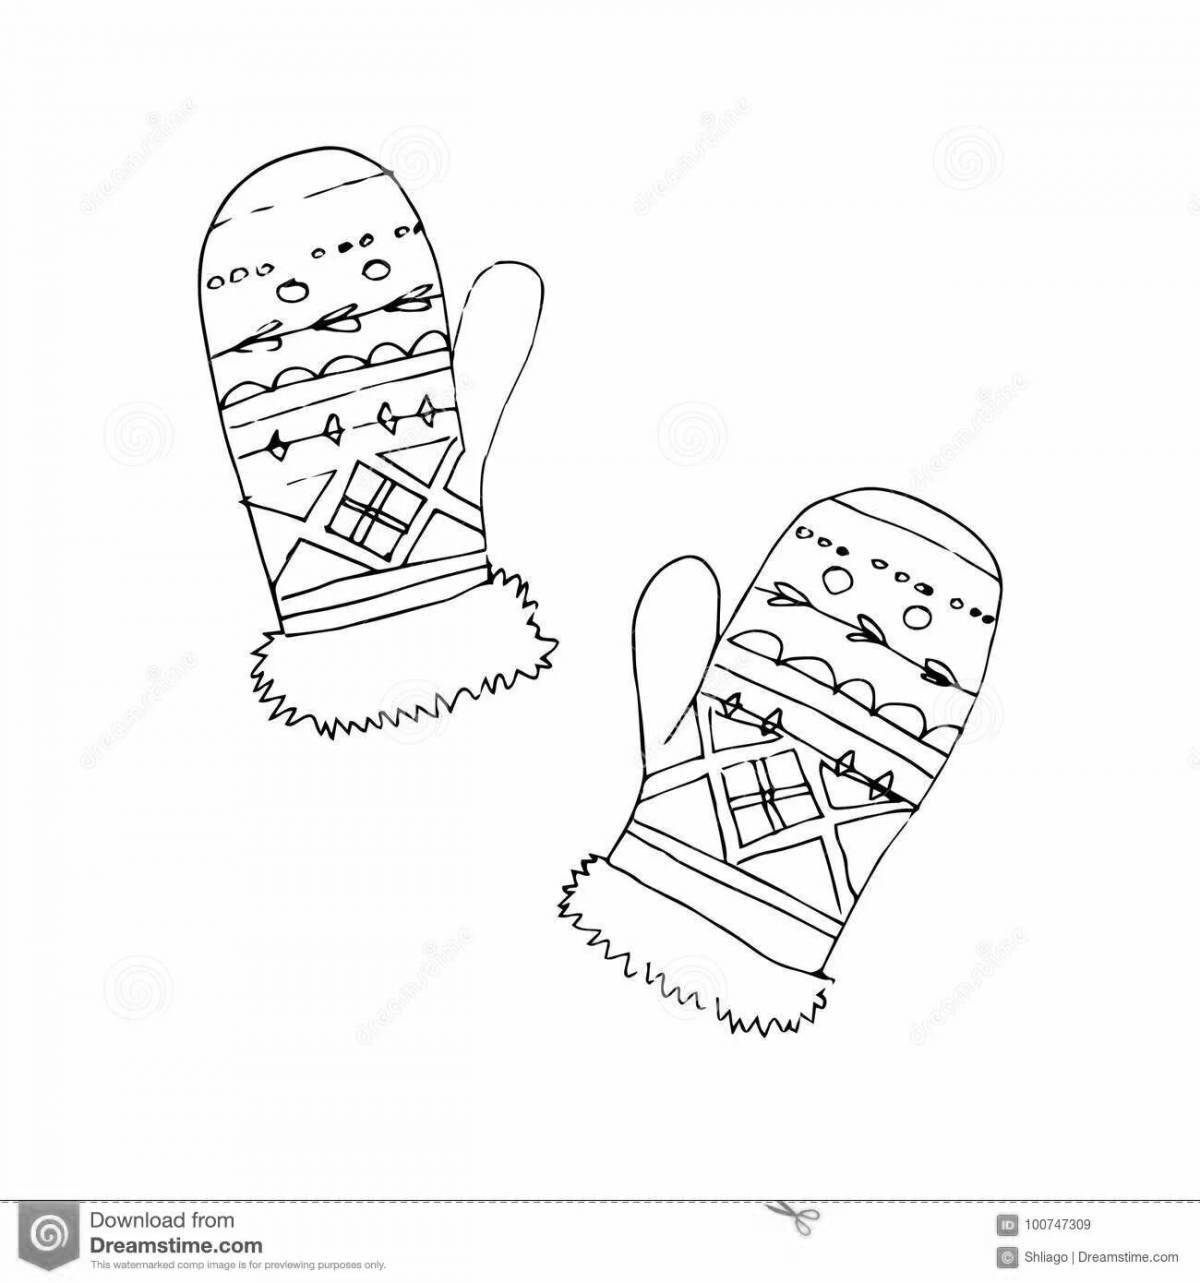 Attractive coloring page of rubber mittens